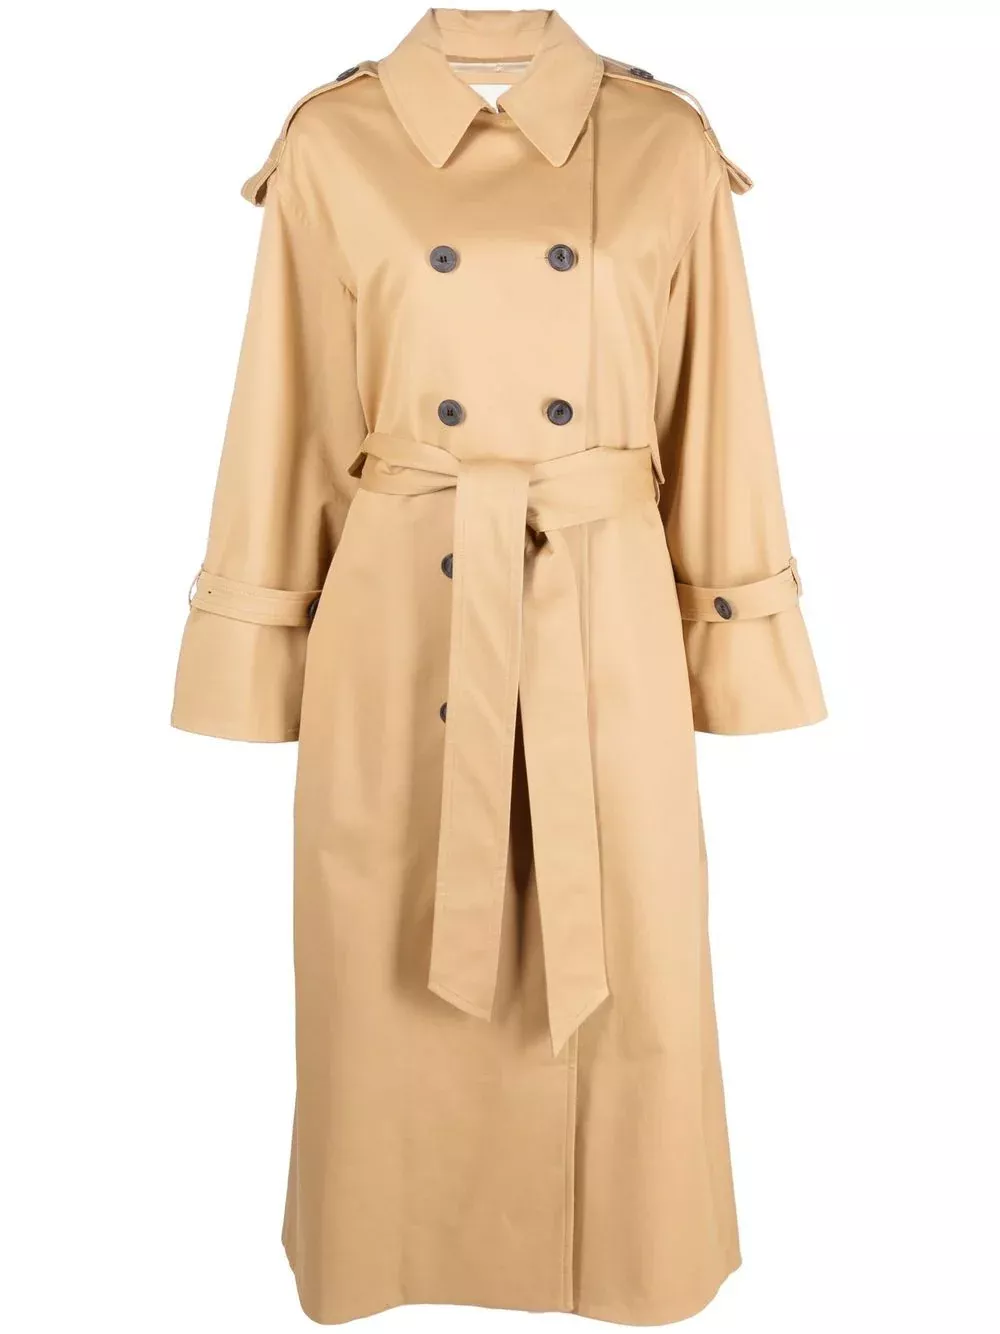 Burberry Double-breasted Wool Tailored Coat - Farfetch